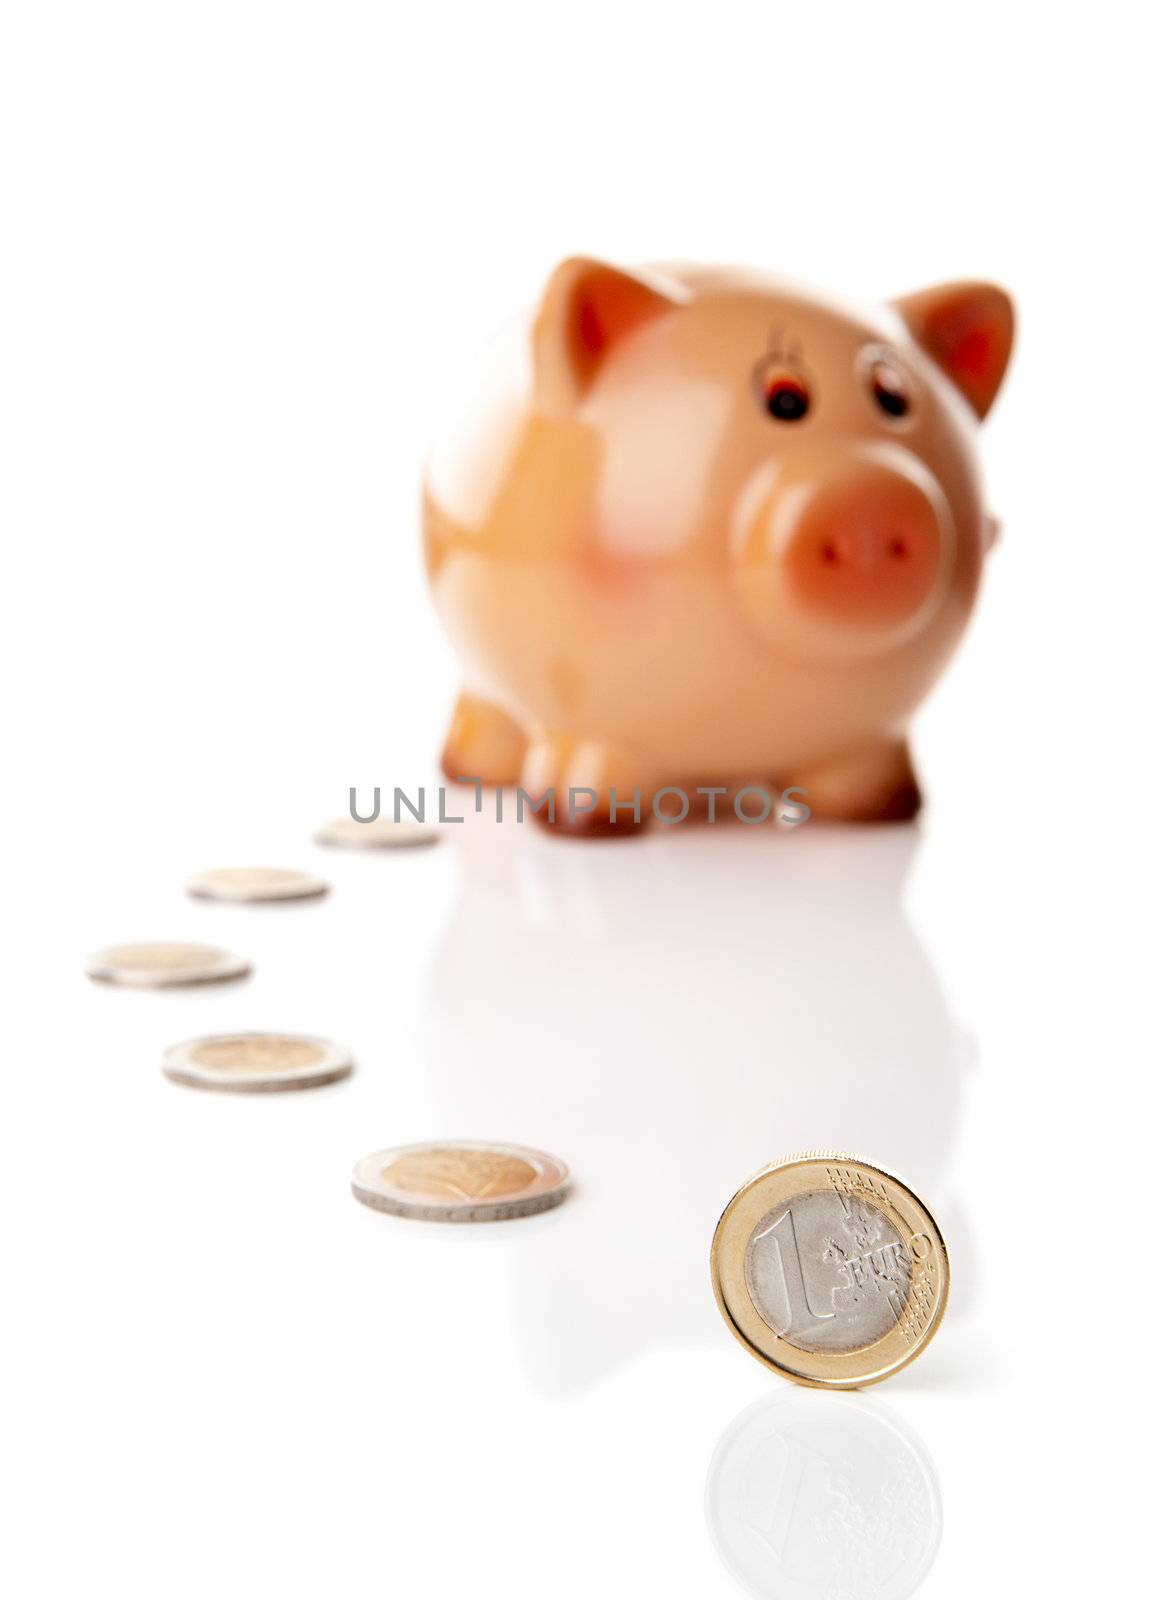 One Euro coin in fornt of a Piggy bank isolated over a white background